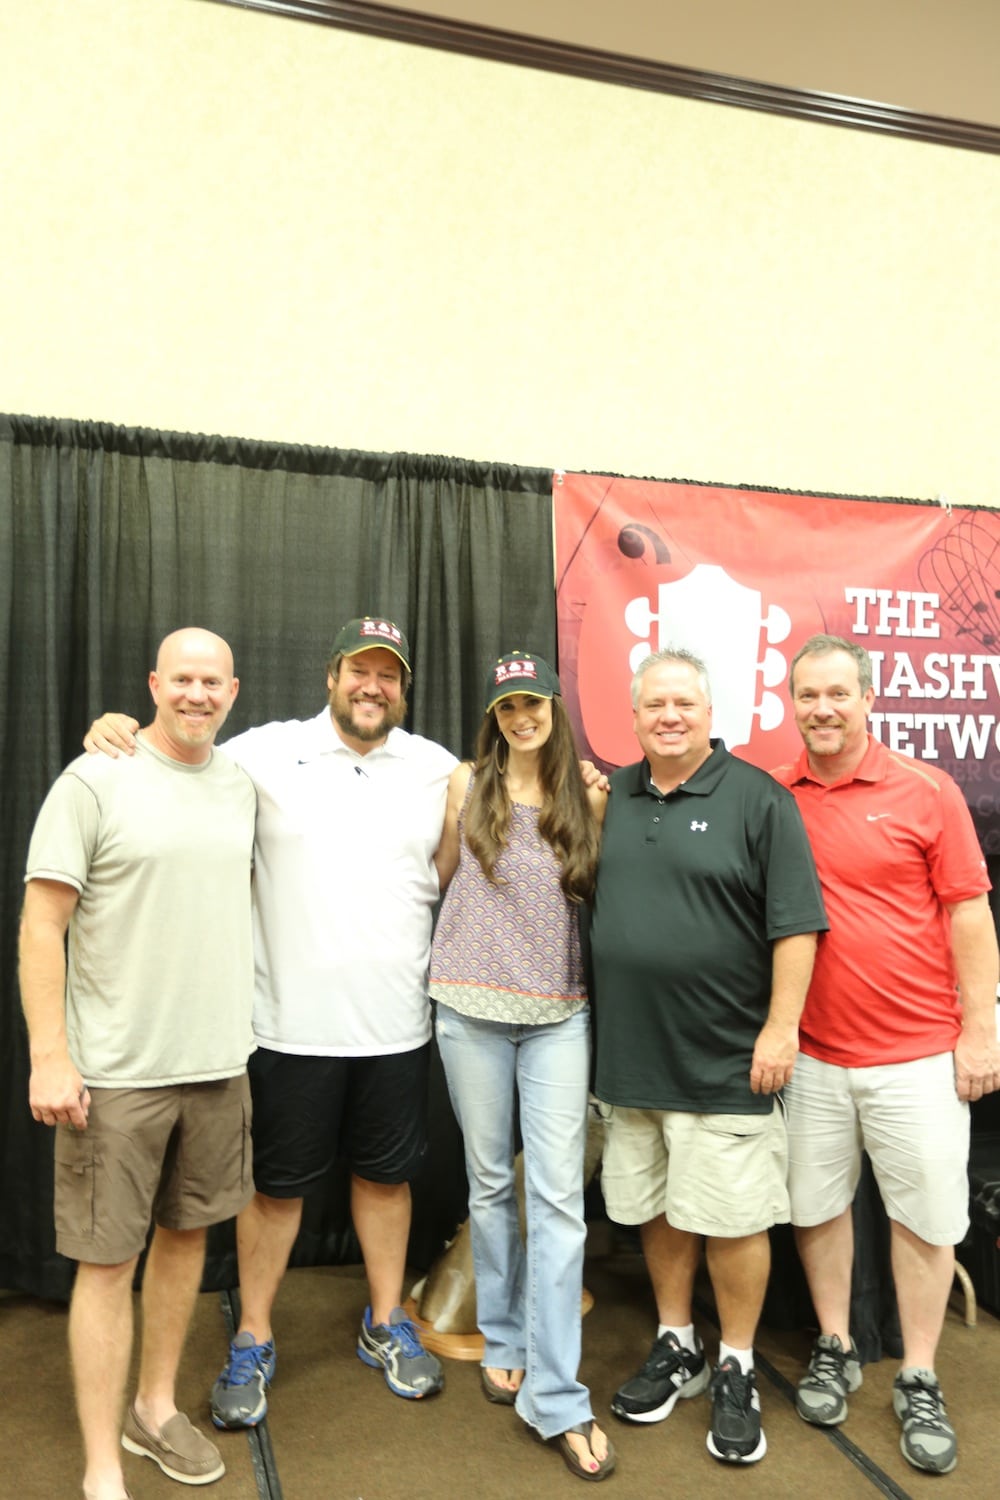 Speedy, Rick, Stacy, Bubba, and Greg; all except me from the Rick and Bubba Show